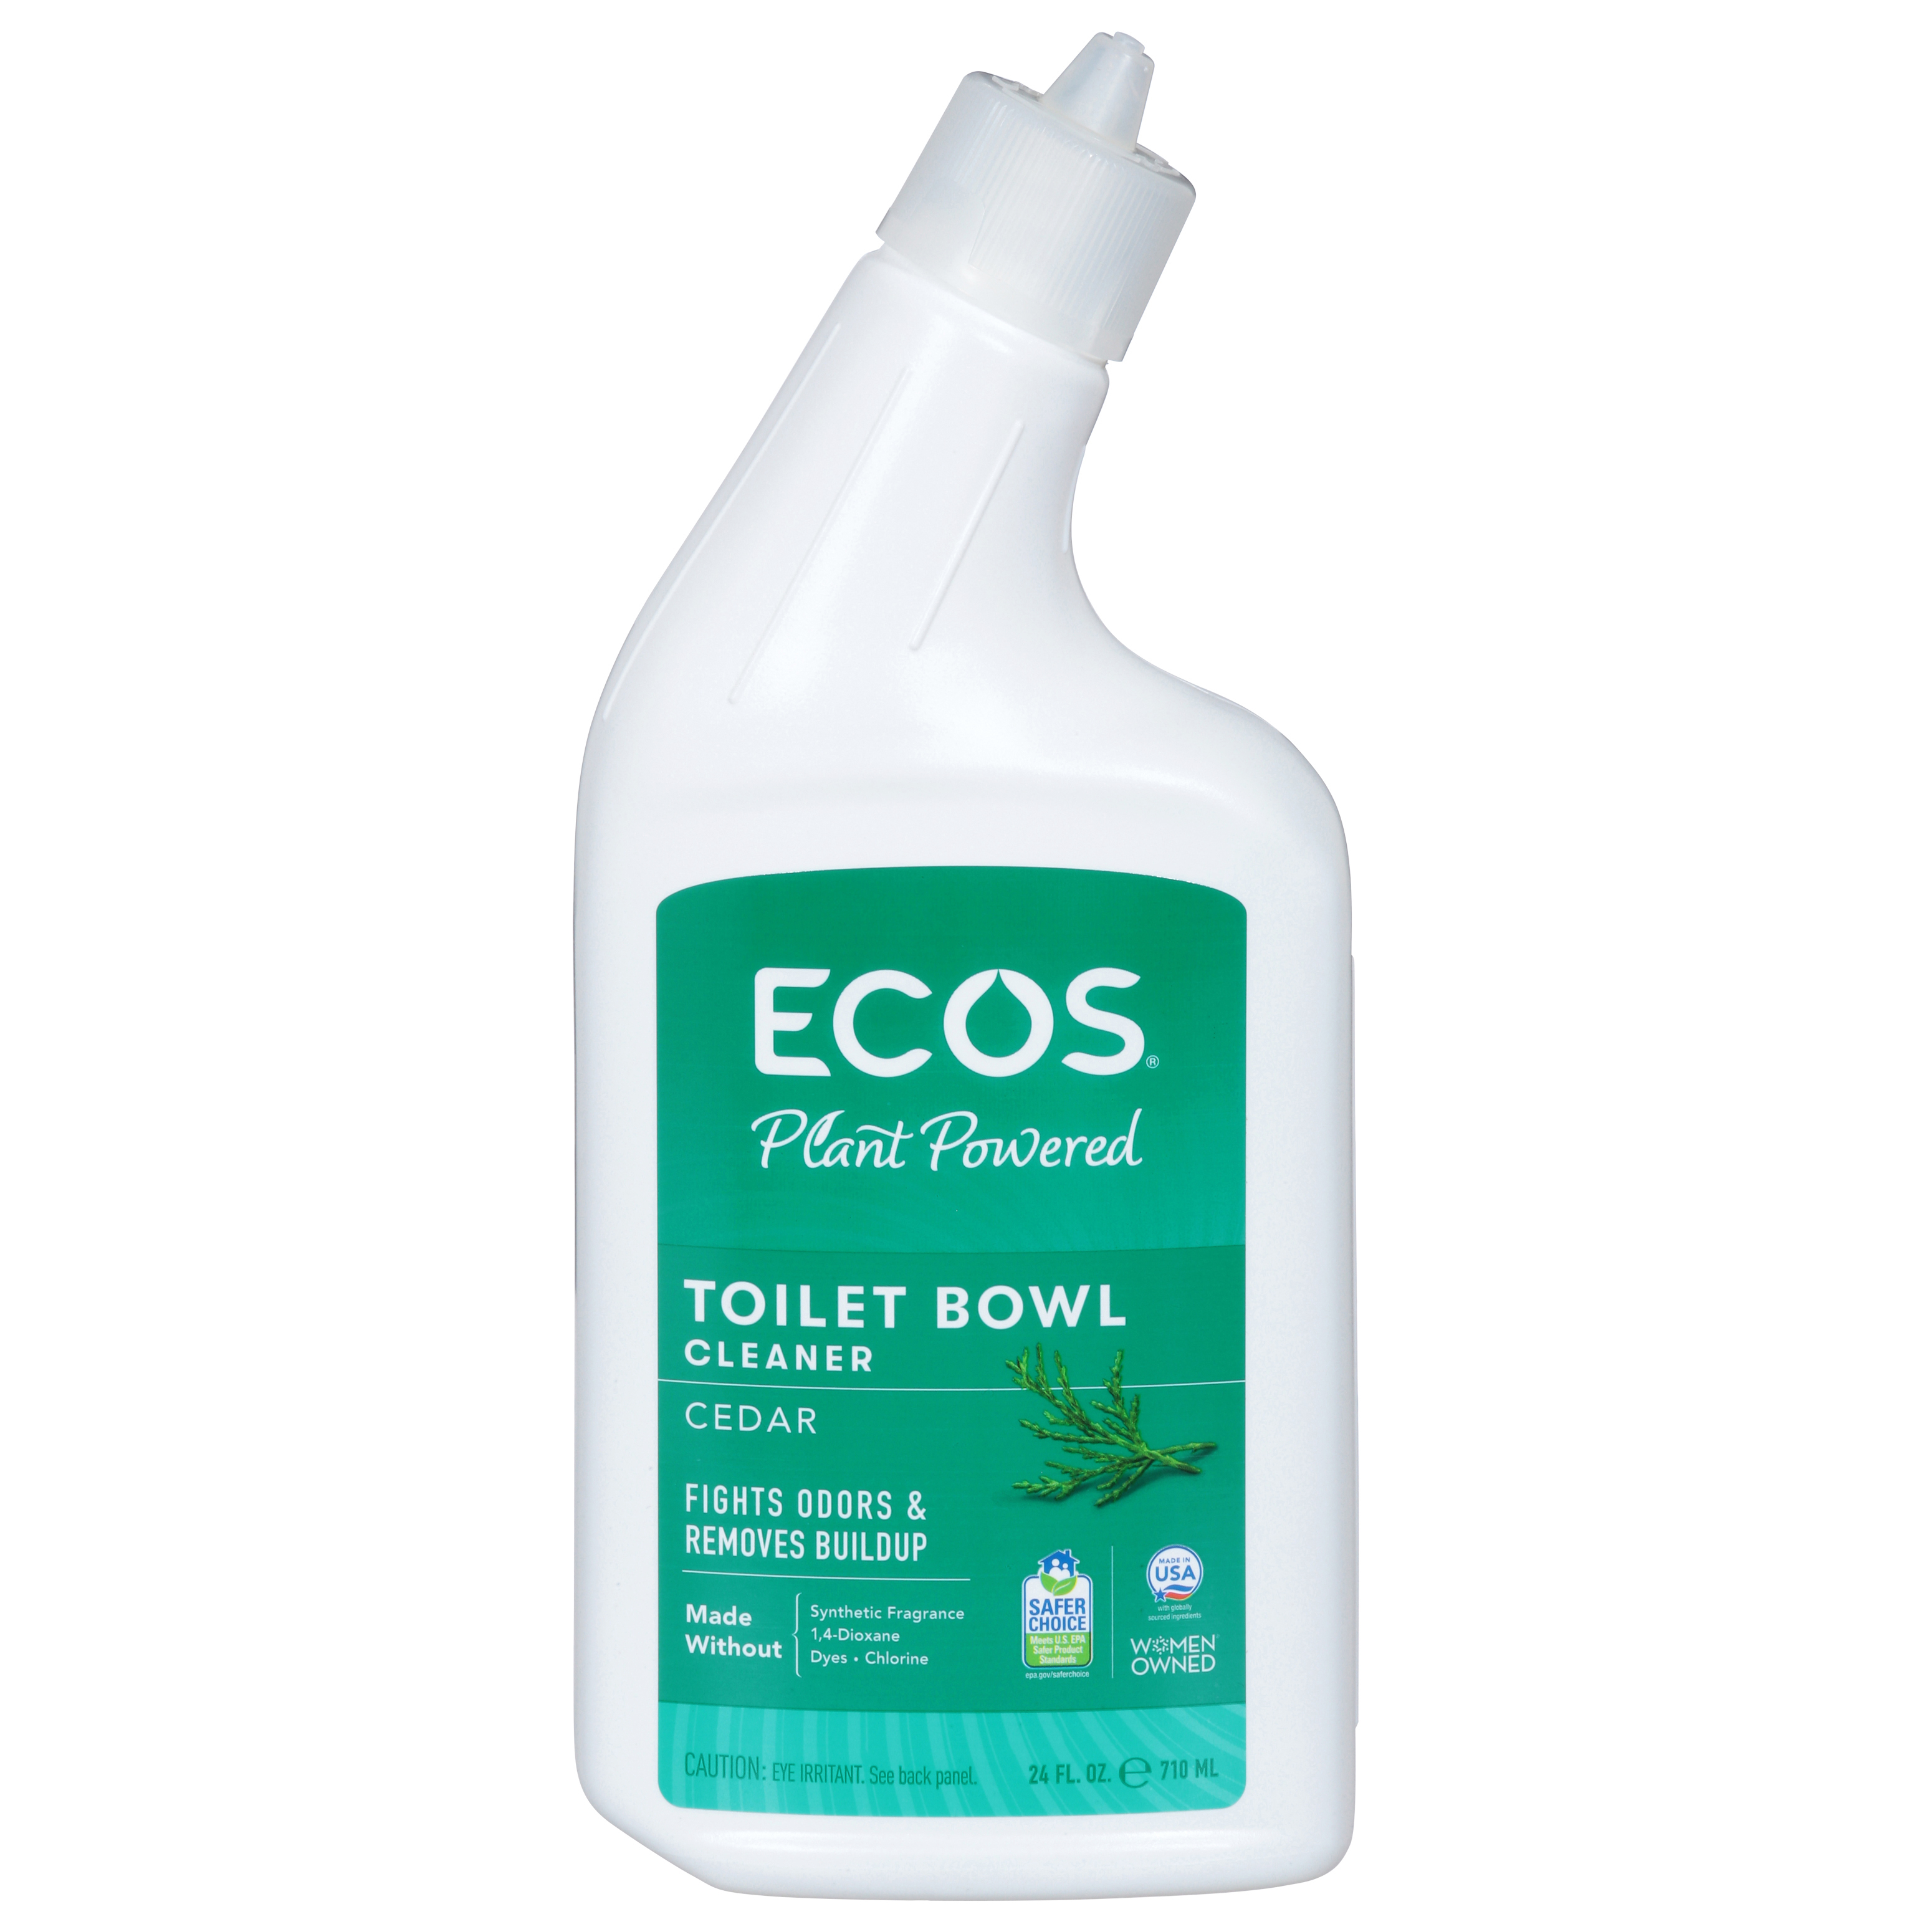 ECOS Toilet Bowl Cleaner, 24 Oz - image 2 of 3